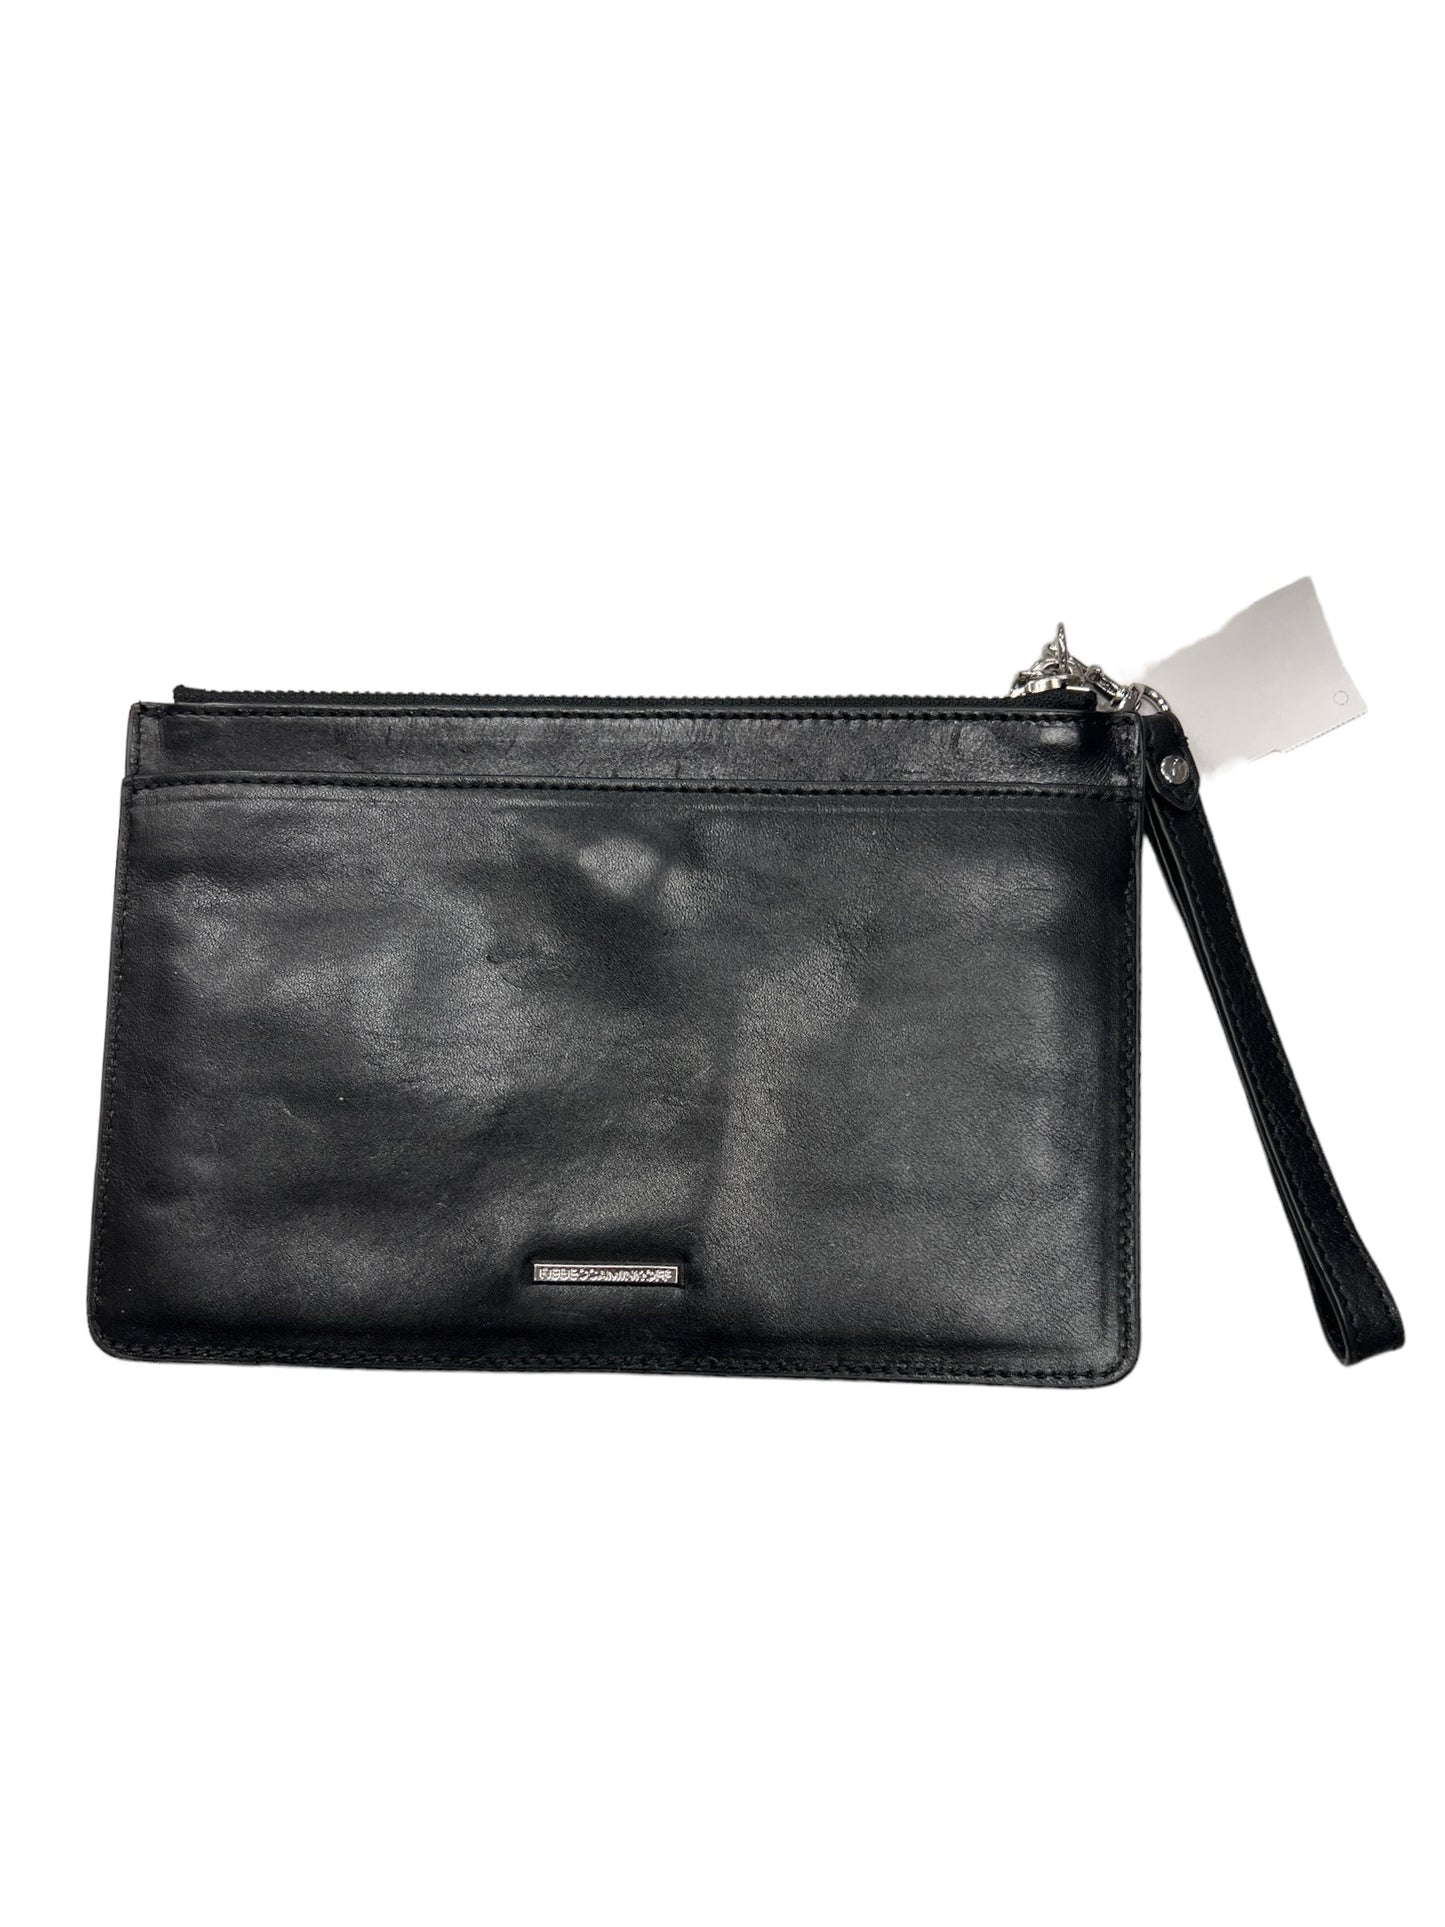 Wristlet Leather By Rebecca Minkoff  Size: Small